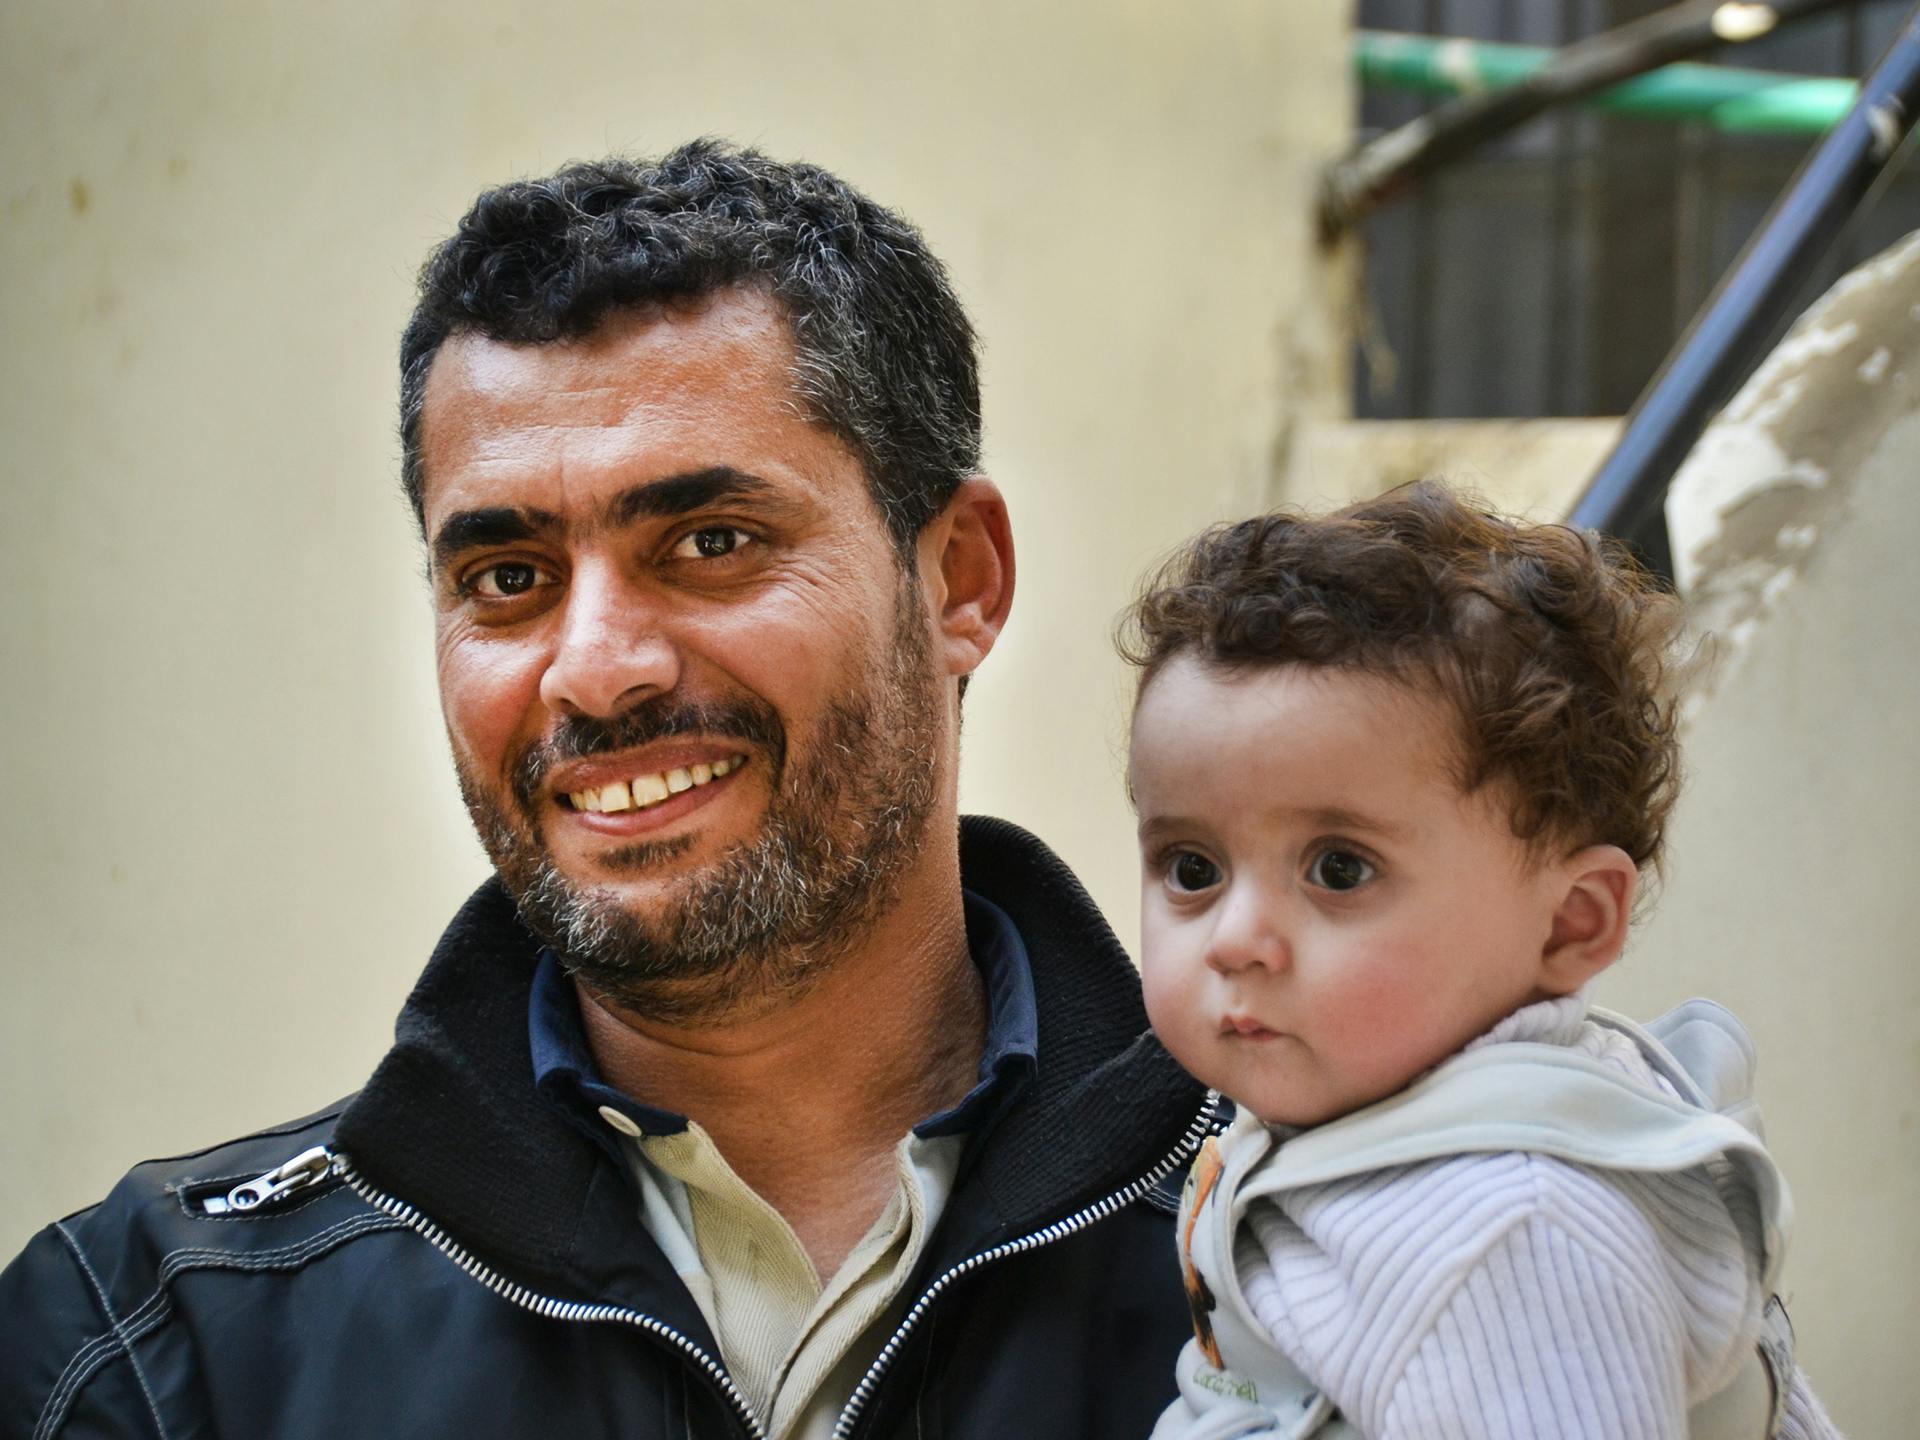 A bearded man smiling and holding a baby.